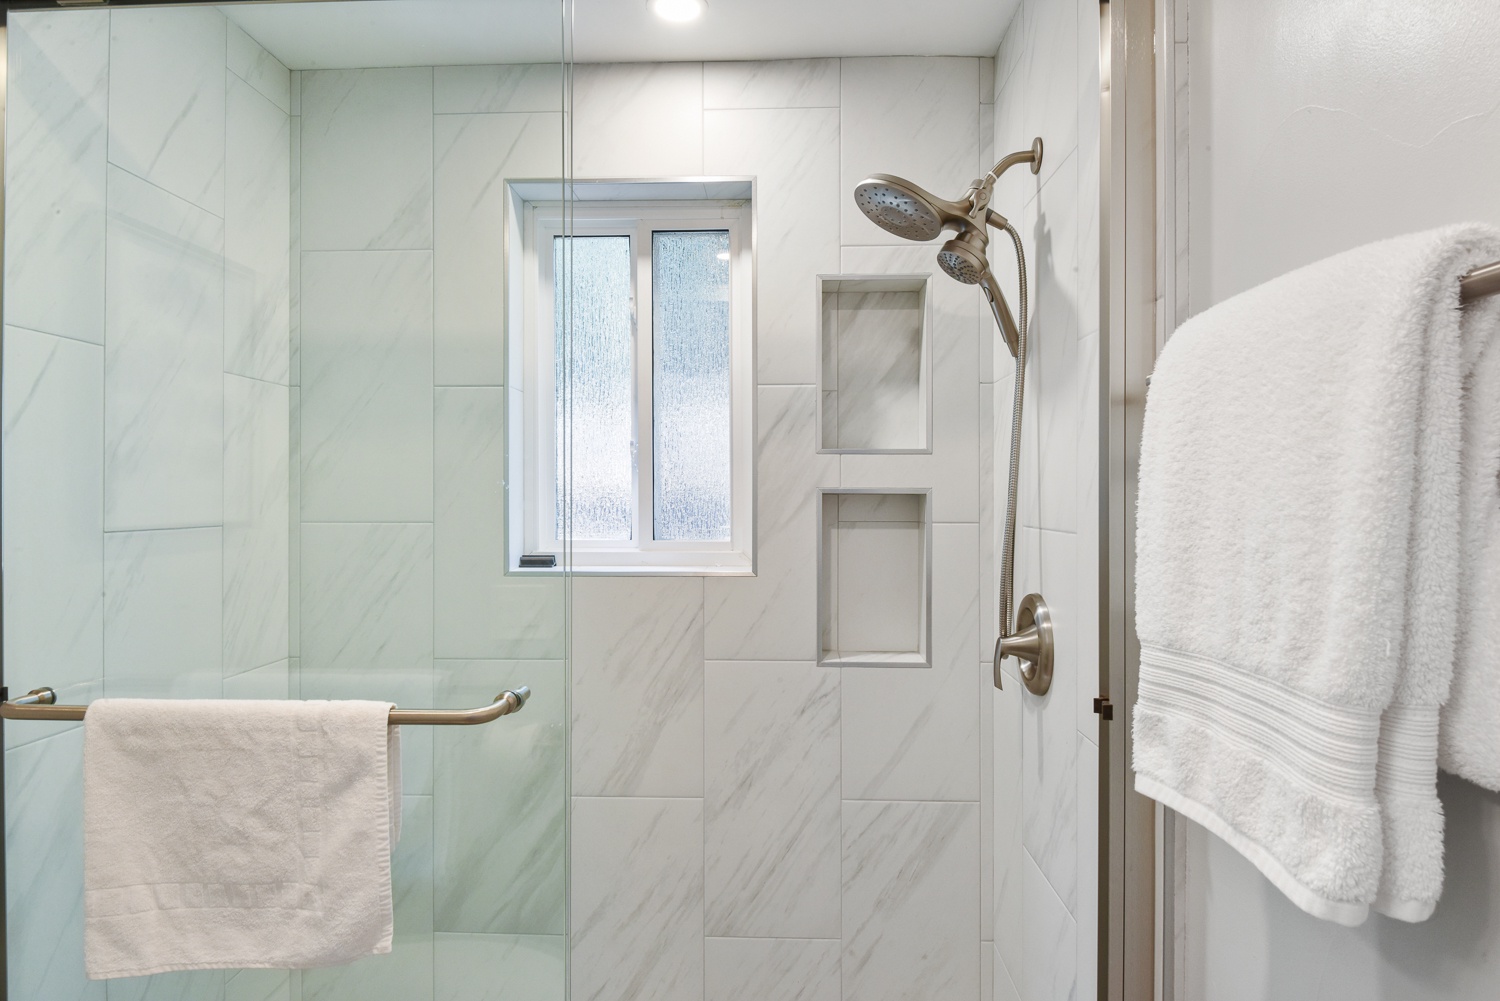 The 2nd level offers a convenient full bathroom with a glass-enclosed shower